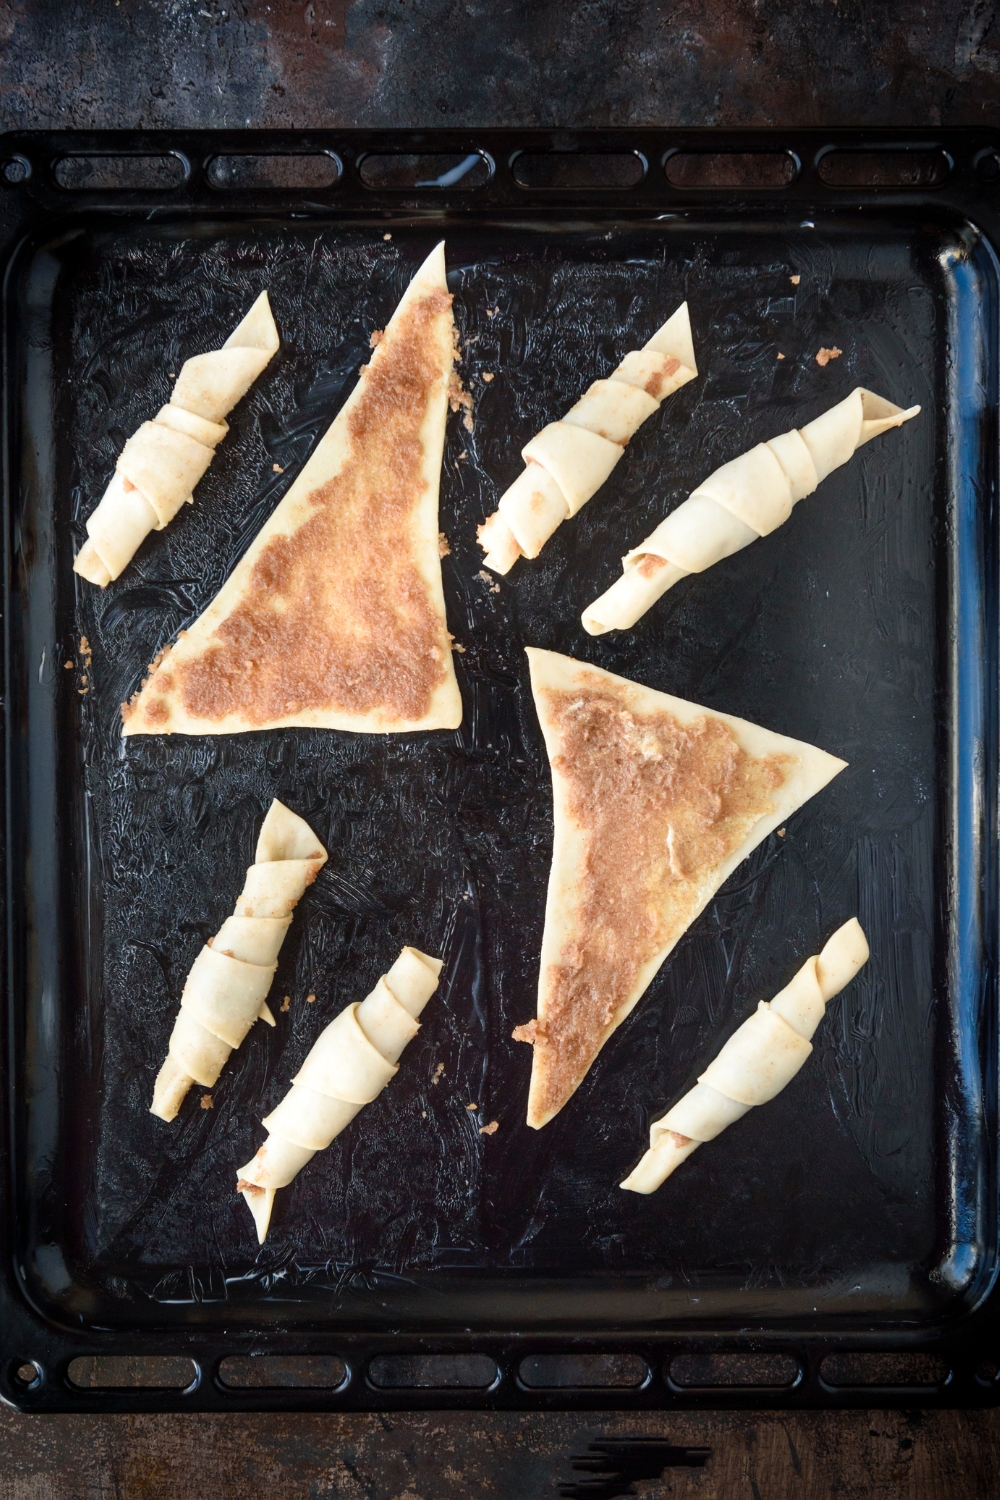 Six crescent rolls are rolled up on a black baking sheet while two triangles of dough lay flat. The triangles are spread with cinnamon and sugar filling.